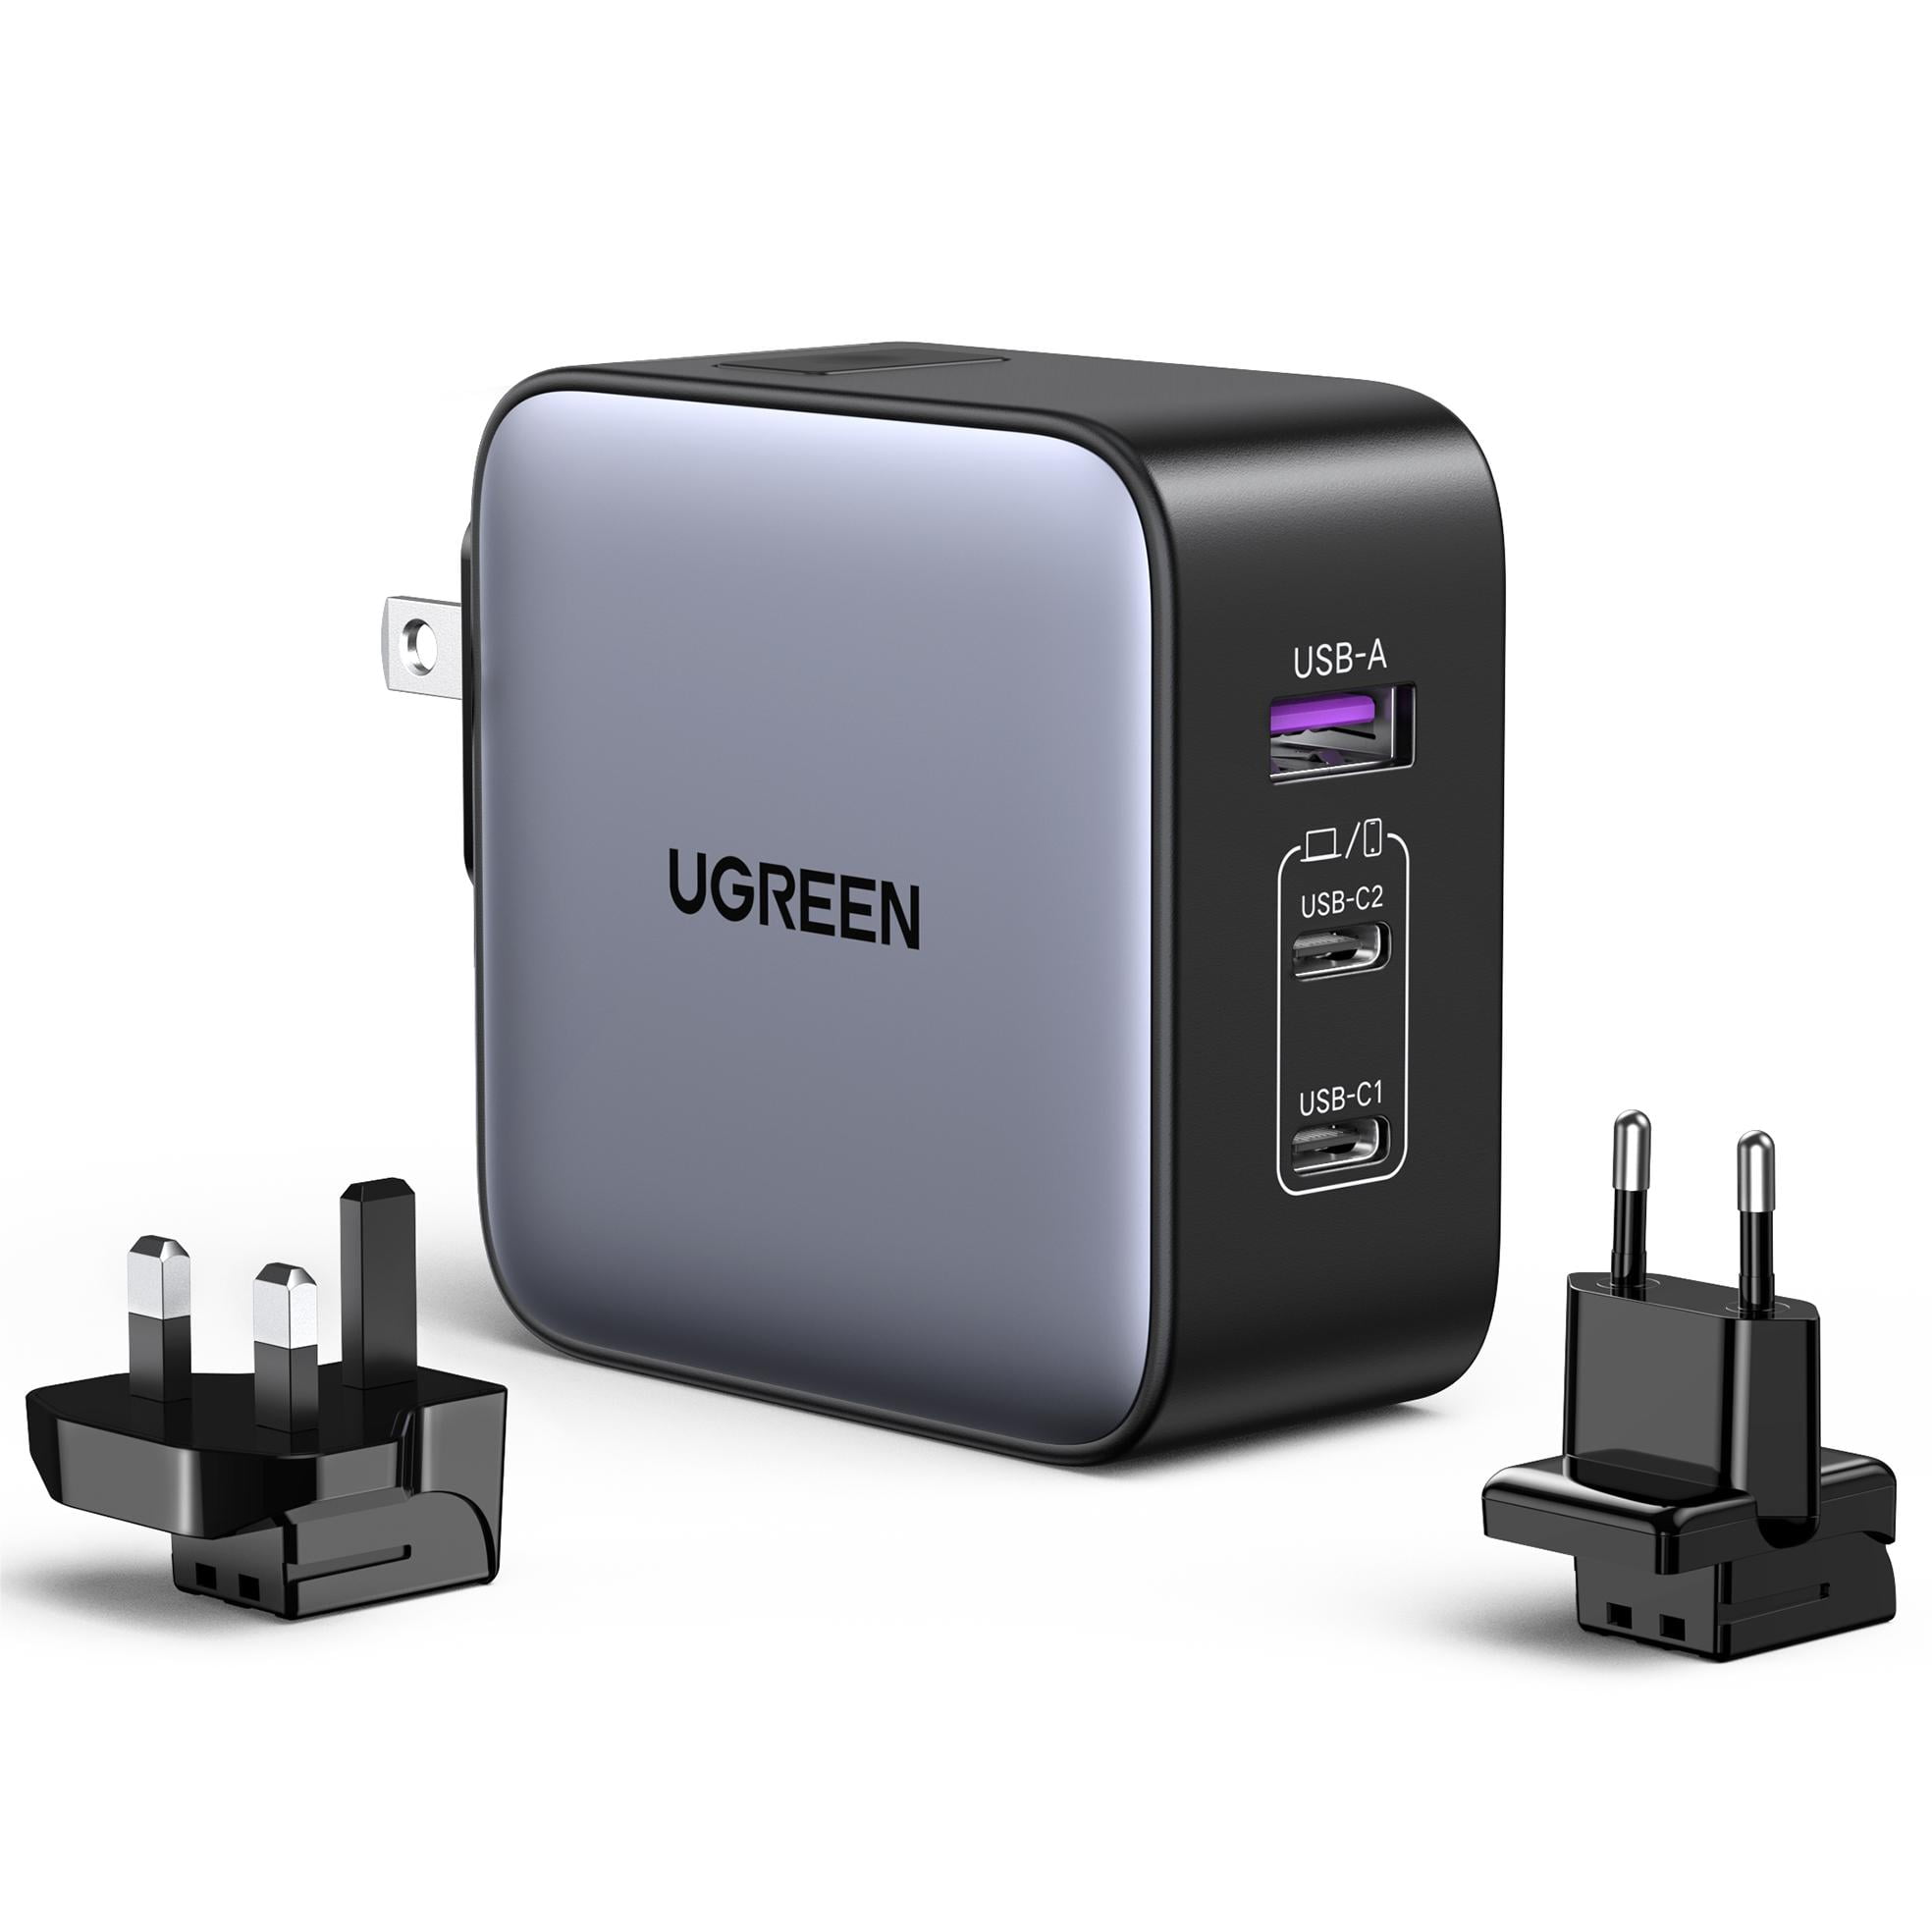 UGREEN 65W USB C Charger, Travel Power Adapter with 3 Switchable Plugs  US/UK/EU, Black